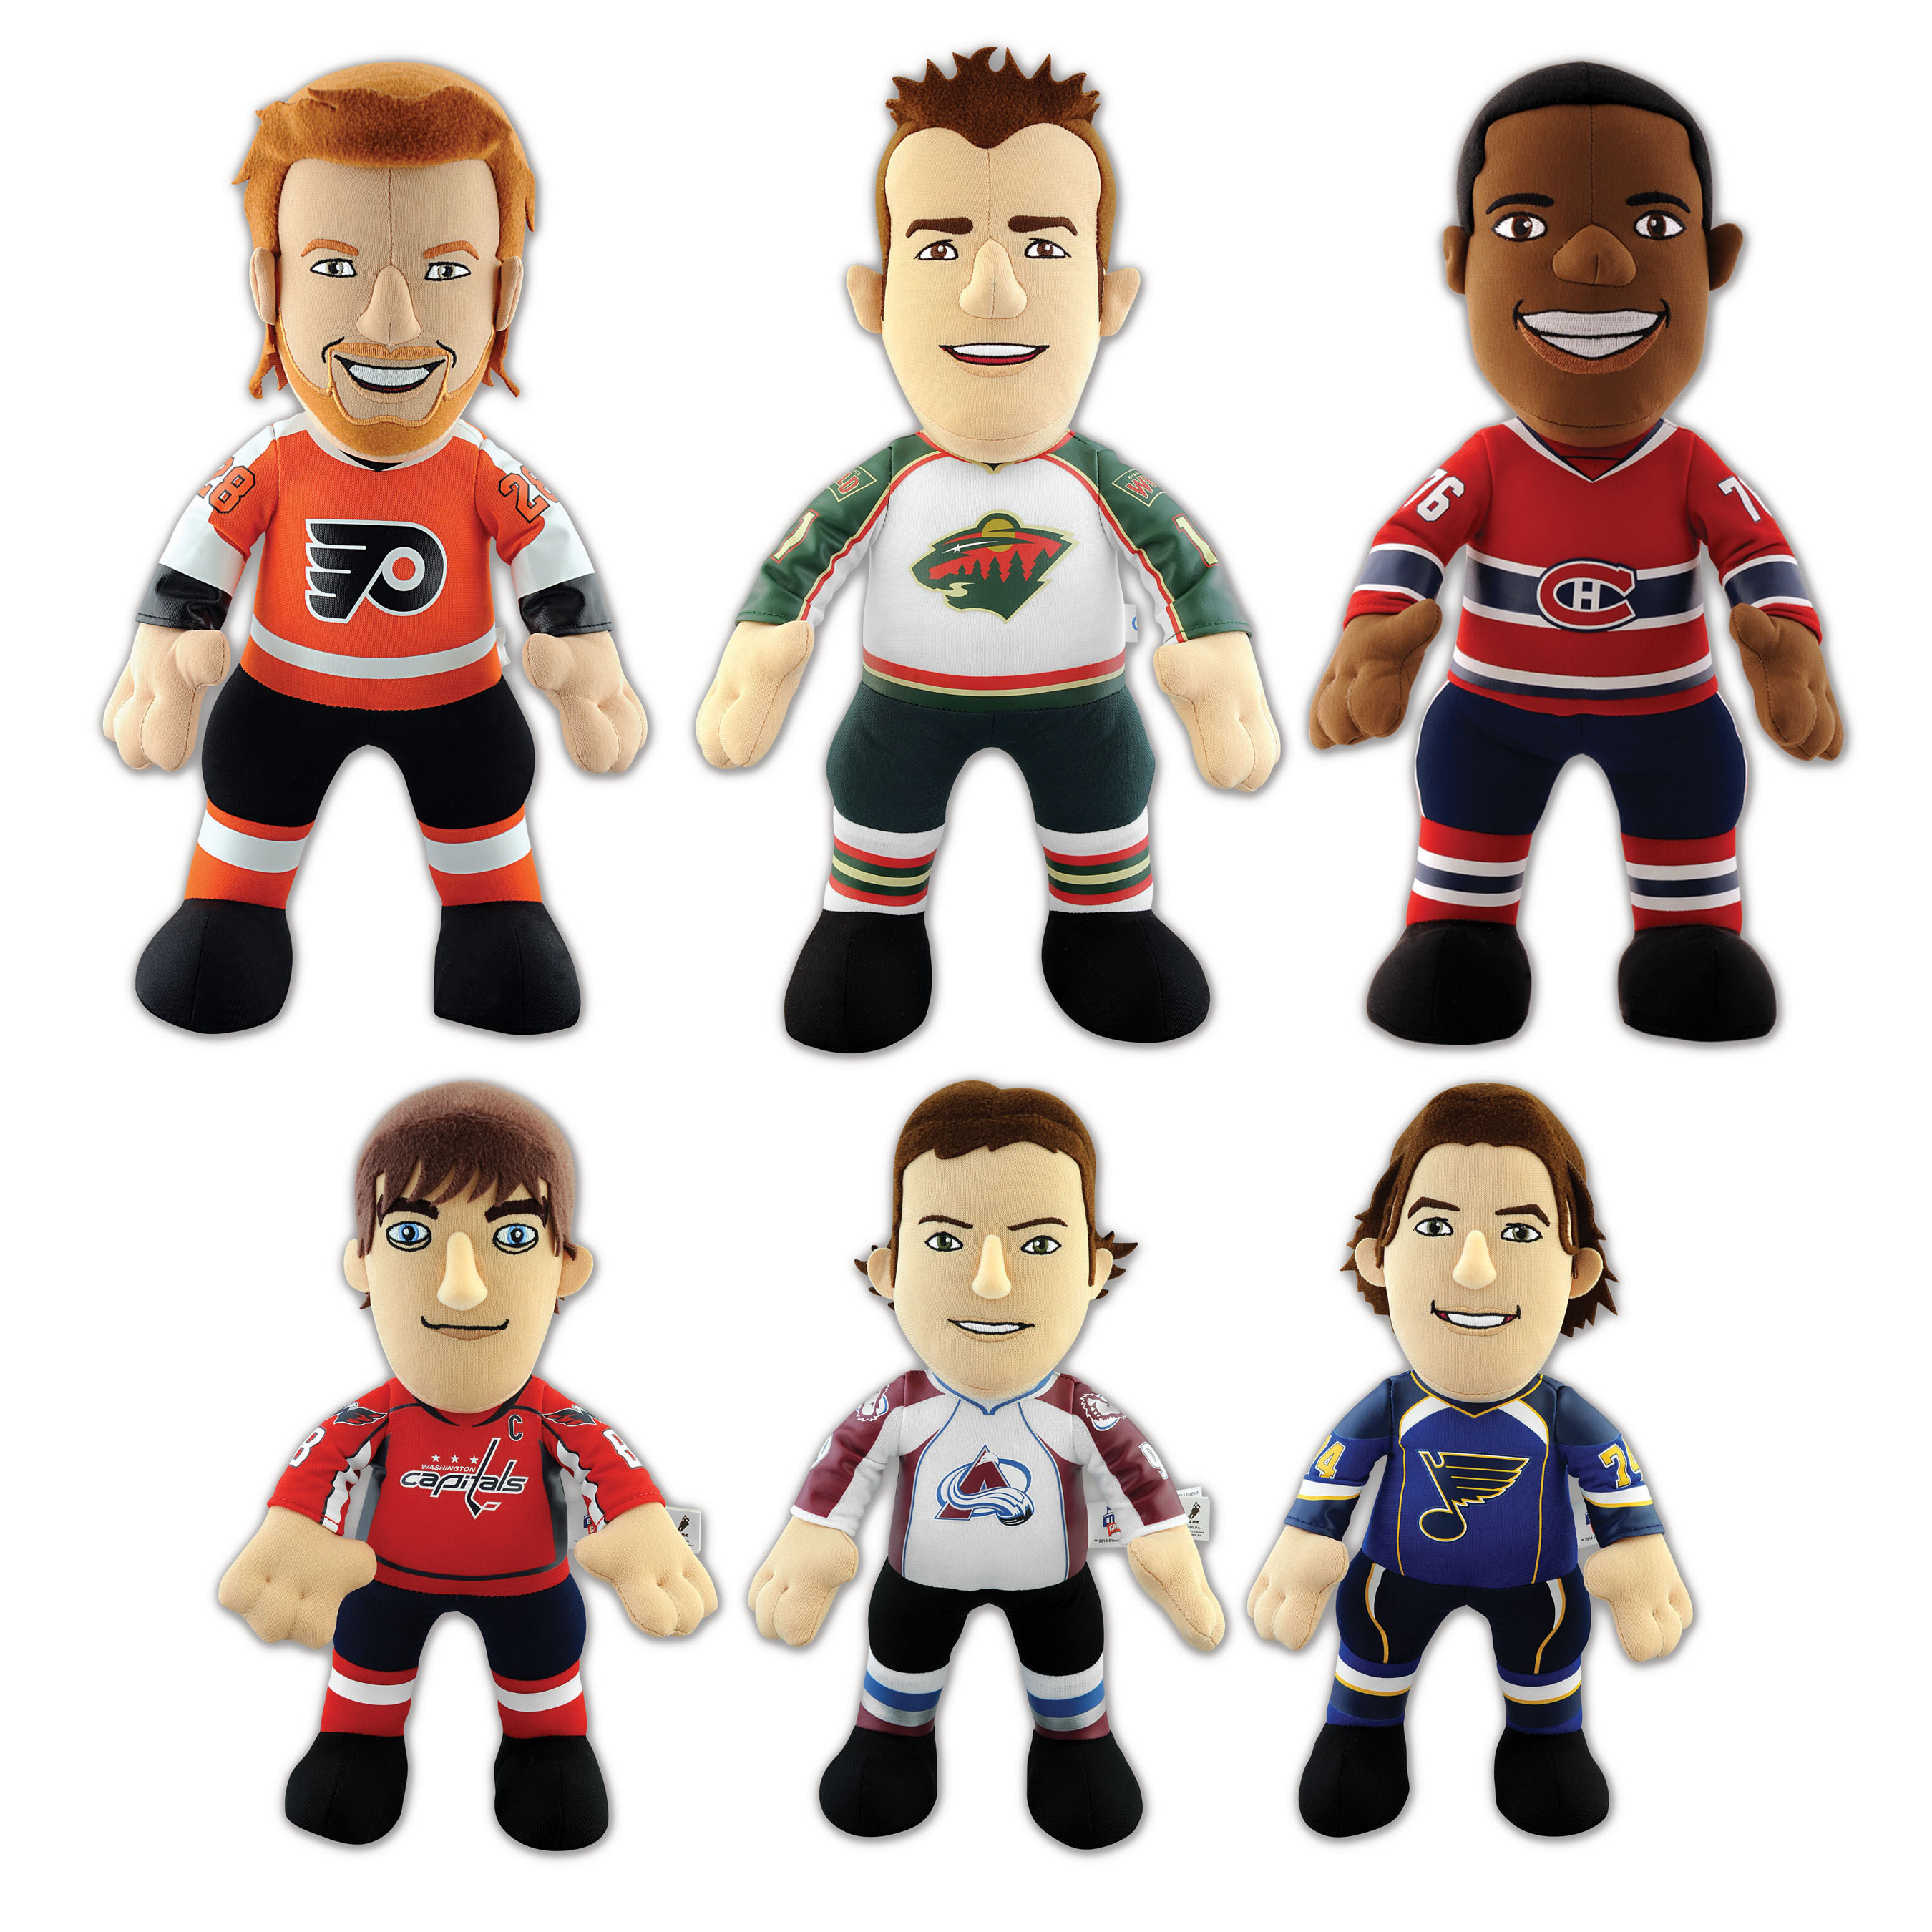 Bleacher Creatures™ Announces the 2012-13 NHL Player Plush Collection Roster